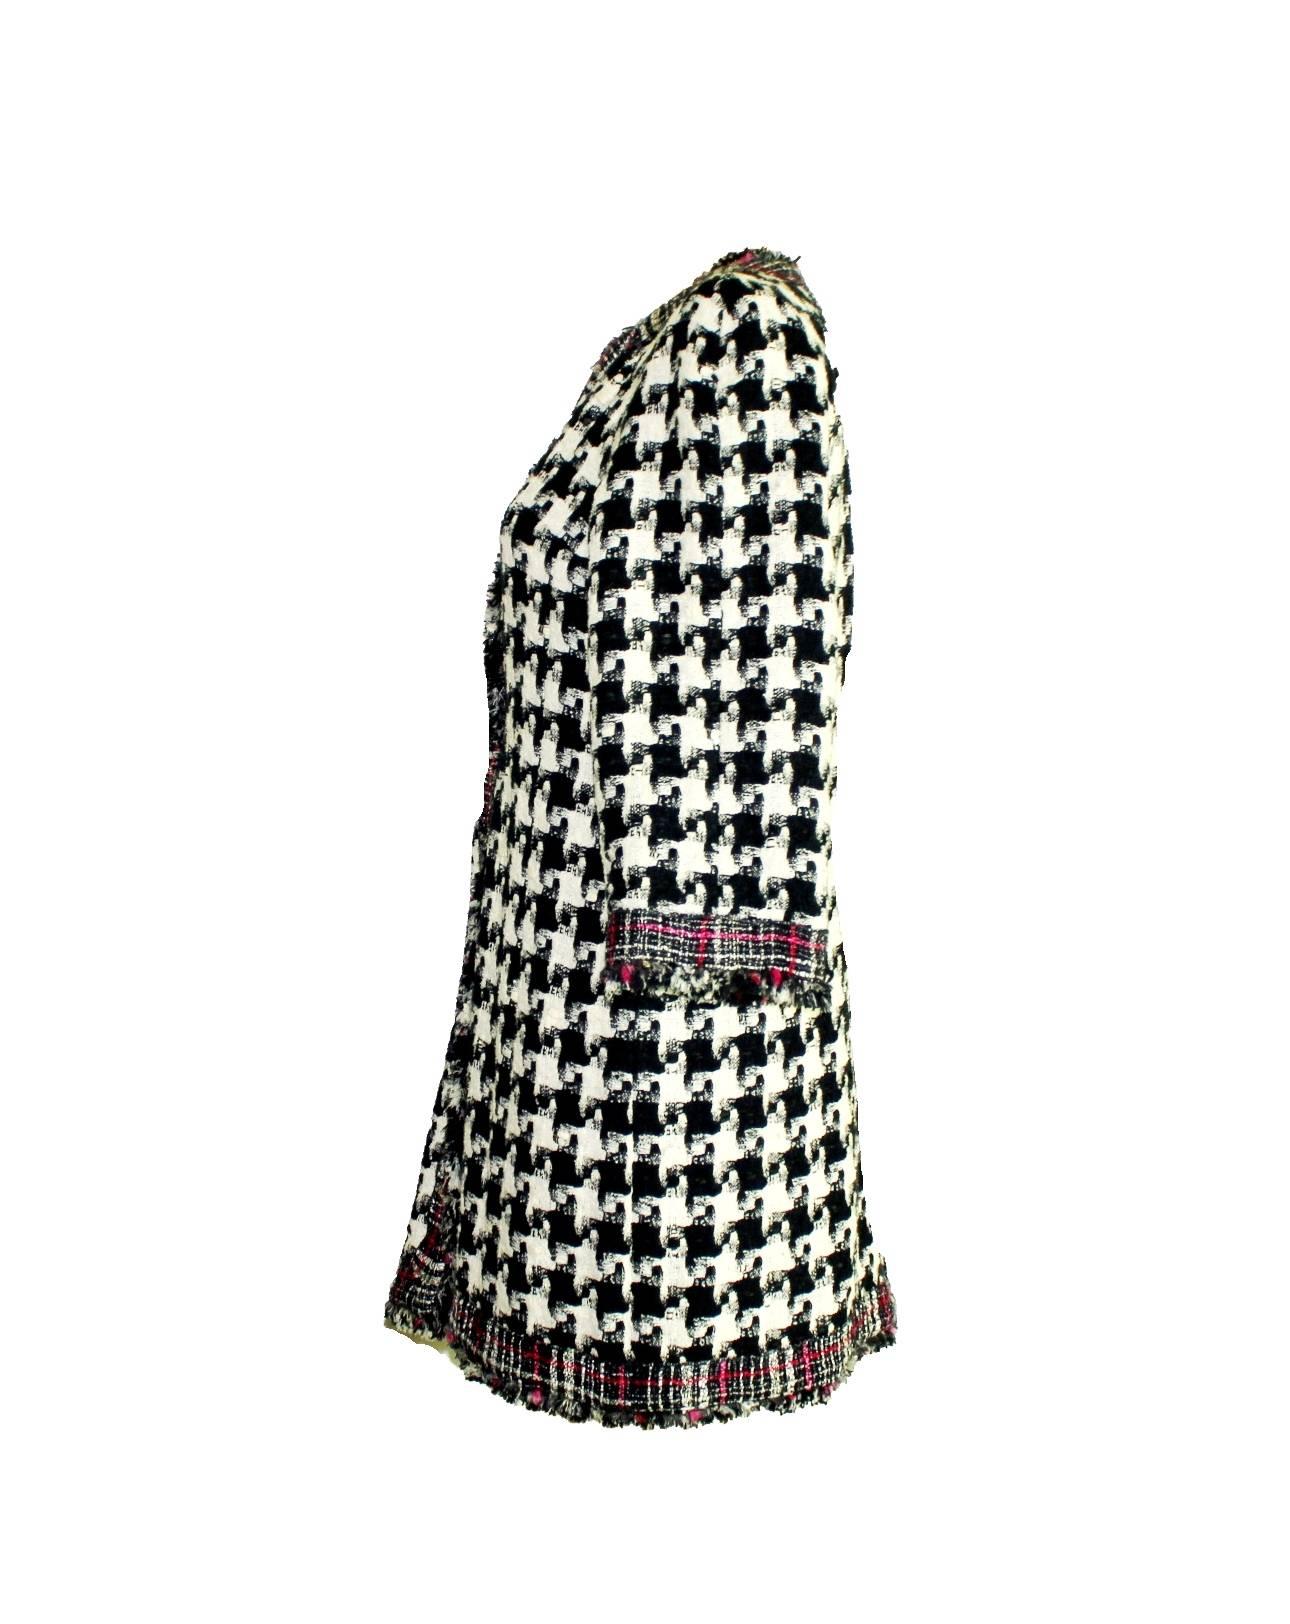 AMAZING & RARE

CHANEL

REVERSIBLE MULTI-COLOR & HOUNDSTOOTH TWEED COAT

DESIGNED BY KARL LAGERFELD

A TRUE CHANEL PIECE THAT SHOULD BE IN EVERY WOMAN'S WARDROBE

DETAILS:
Beautiful CHANEL tweed coat designed by Karl Lagerfeld
A true